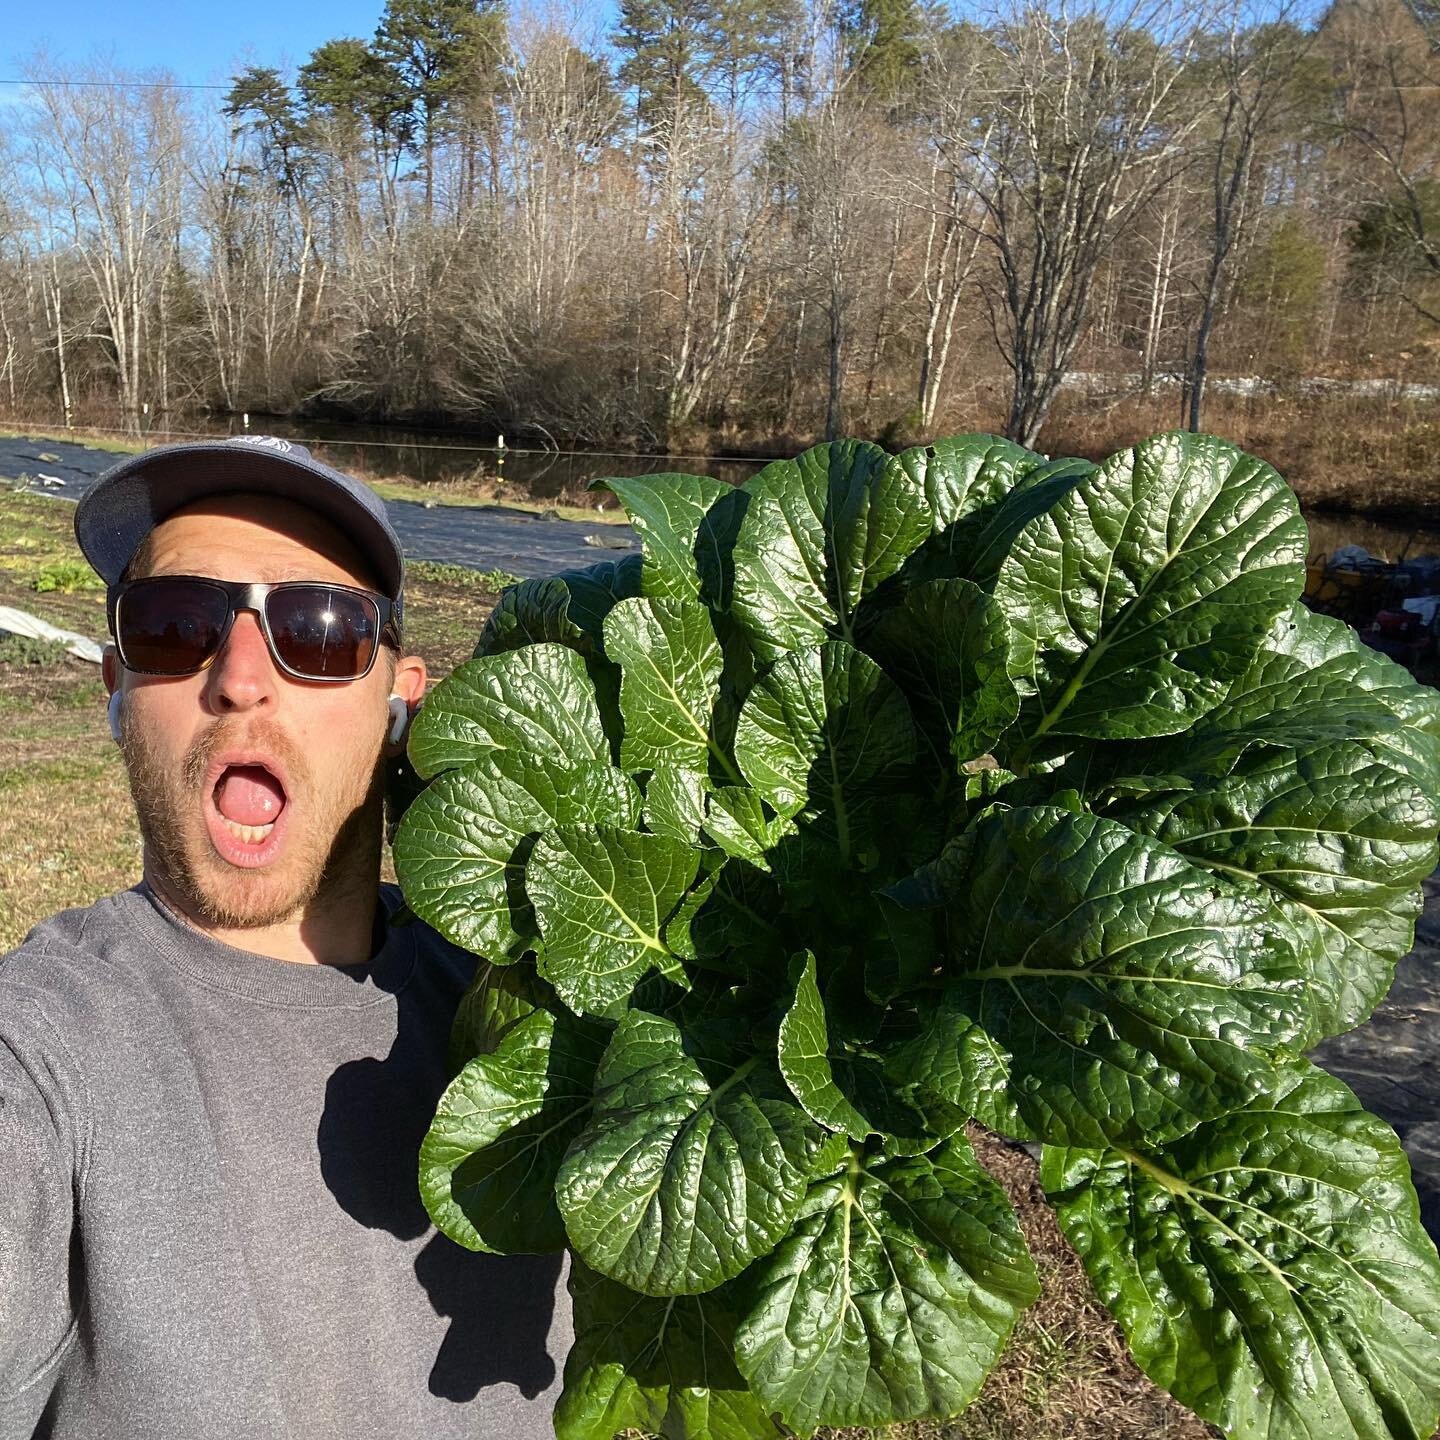 This big, beautiful, winter brassica was a volunteer from last fall, and has maintained this deep green without any cover and temps in the teens. 
.
.
.
#whycantallmycropsbethistough #hardy #growsomethinggreen #tatsoi #smallfarm #winterfarming #csa #